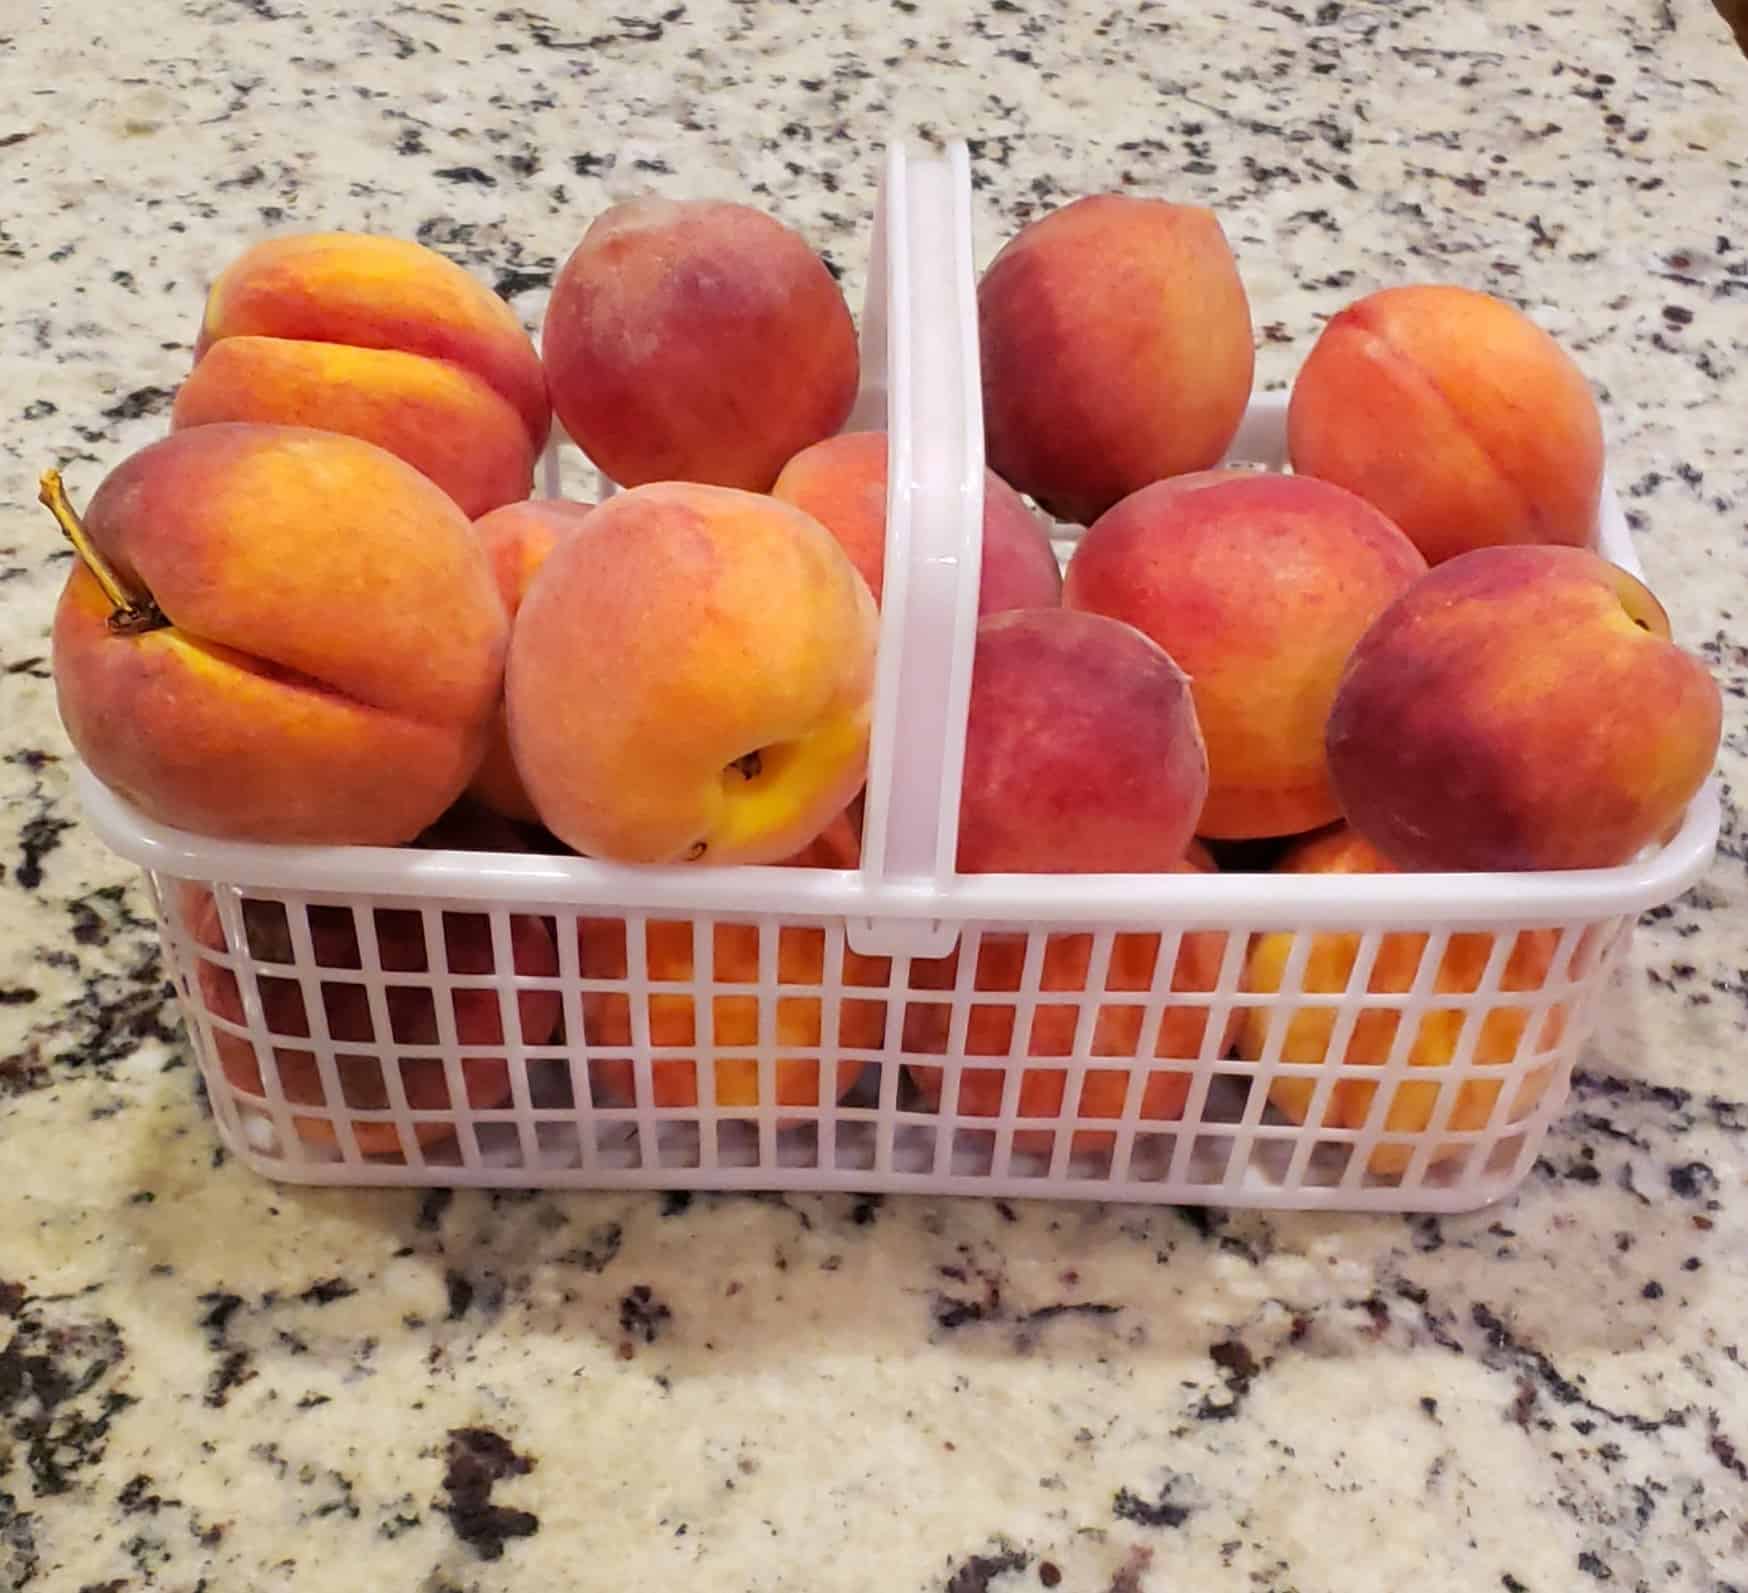 A white basket of peaches ready for cobbler making!